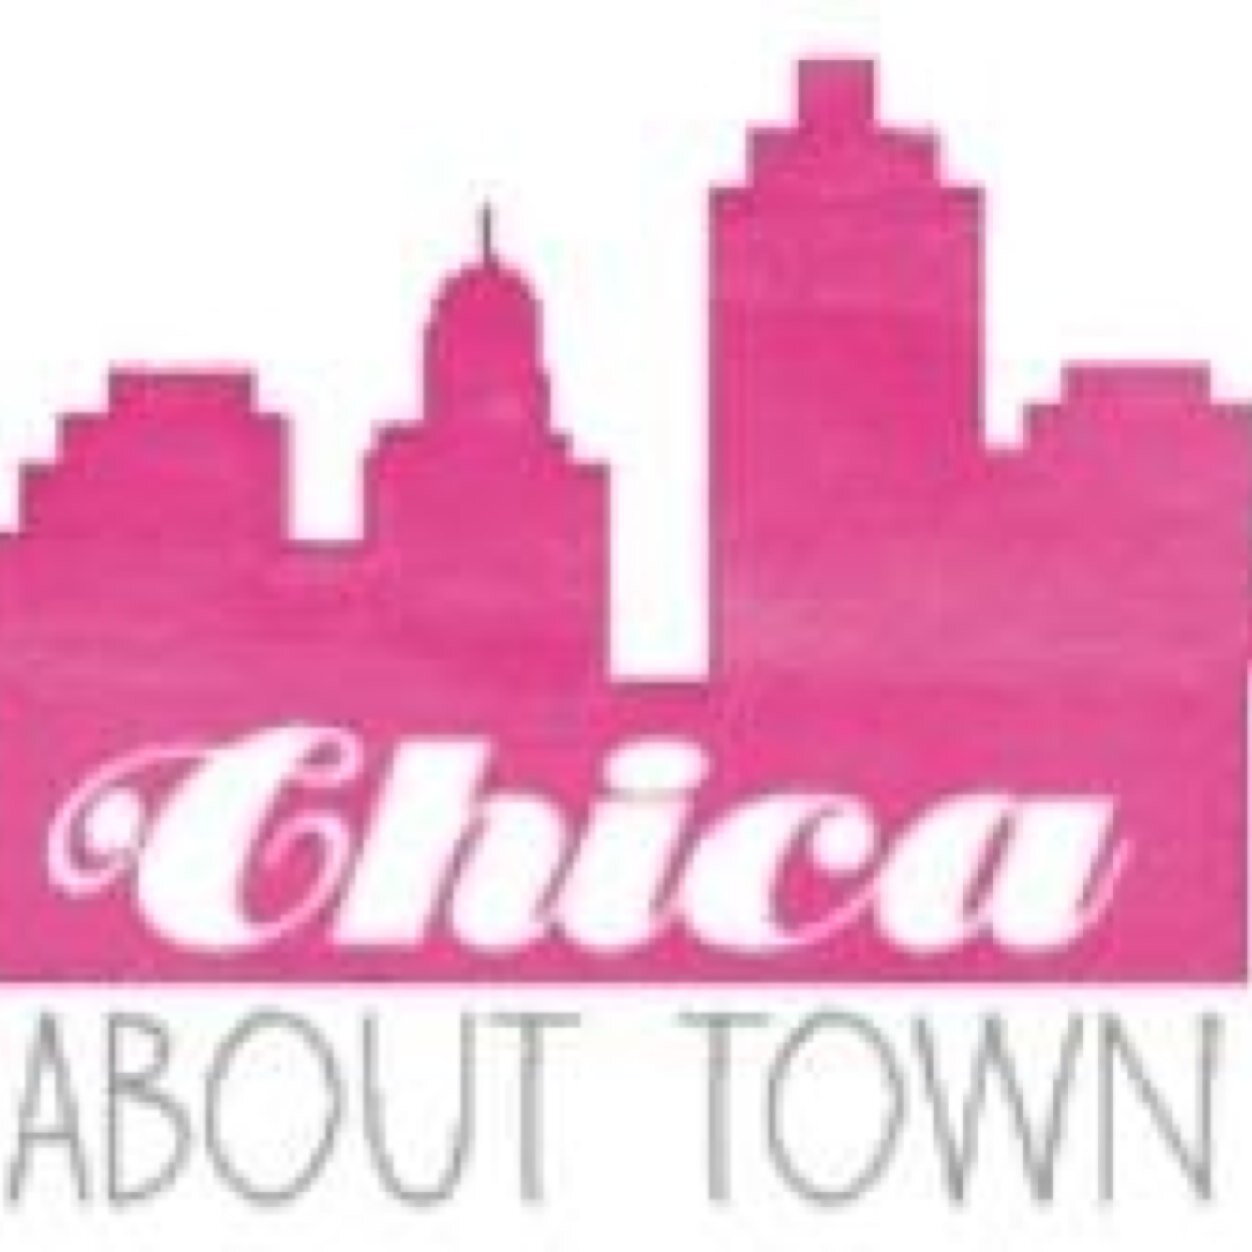 Chica About Town